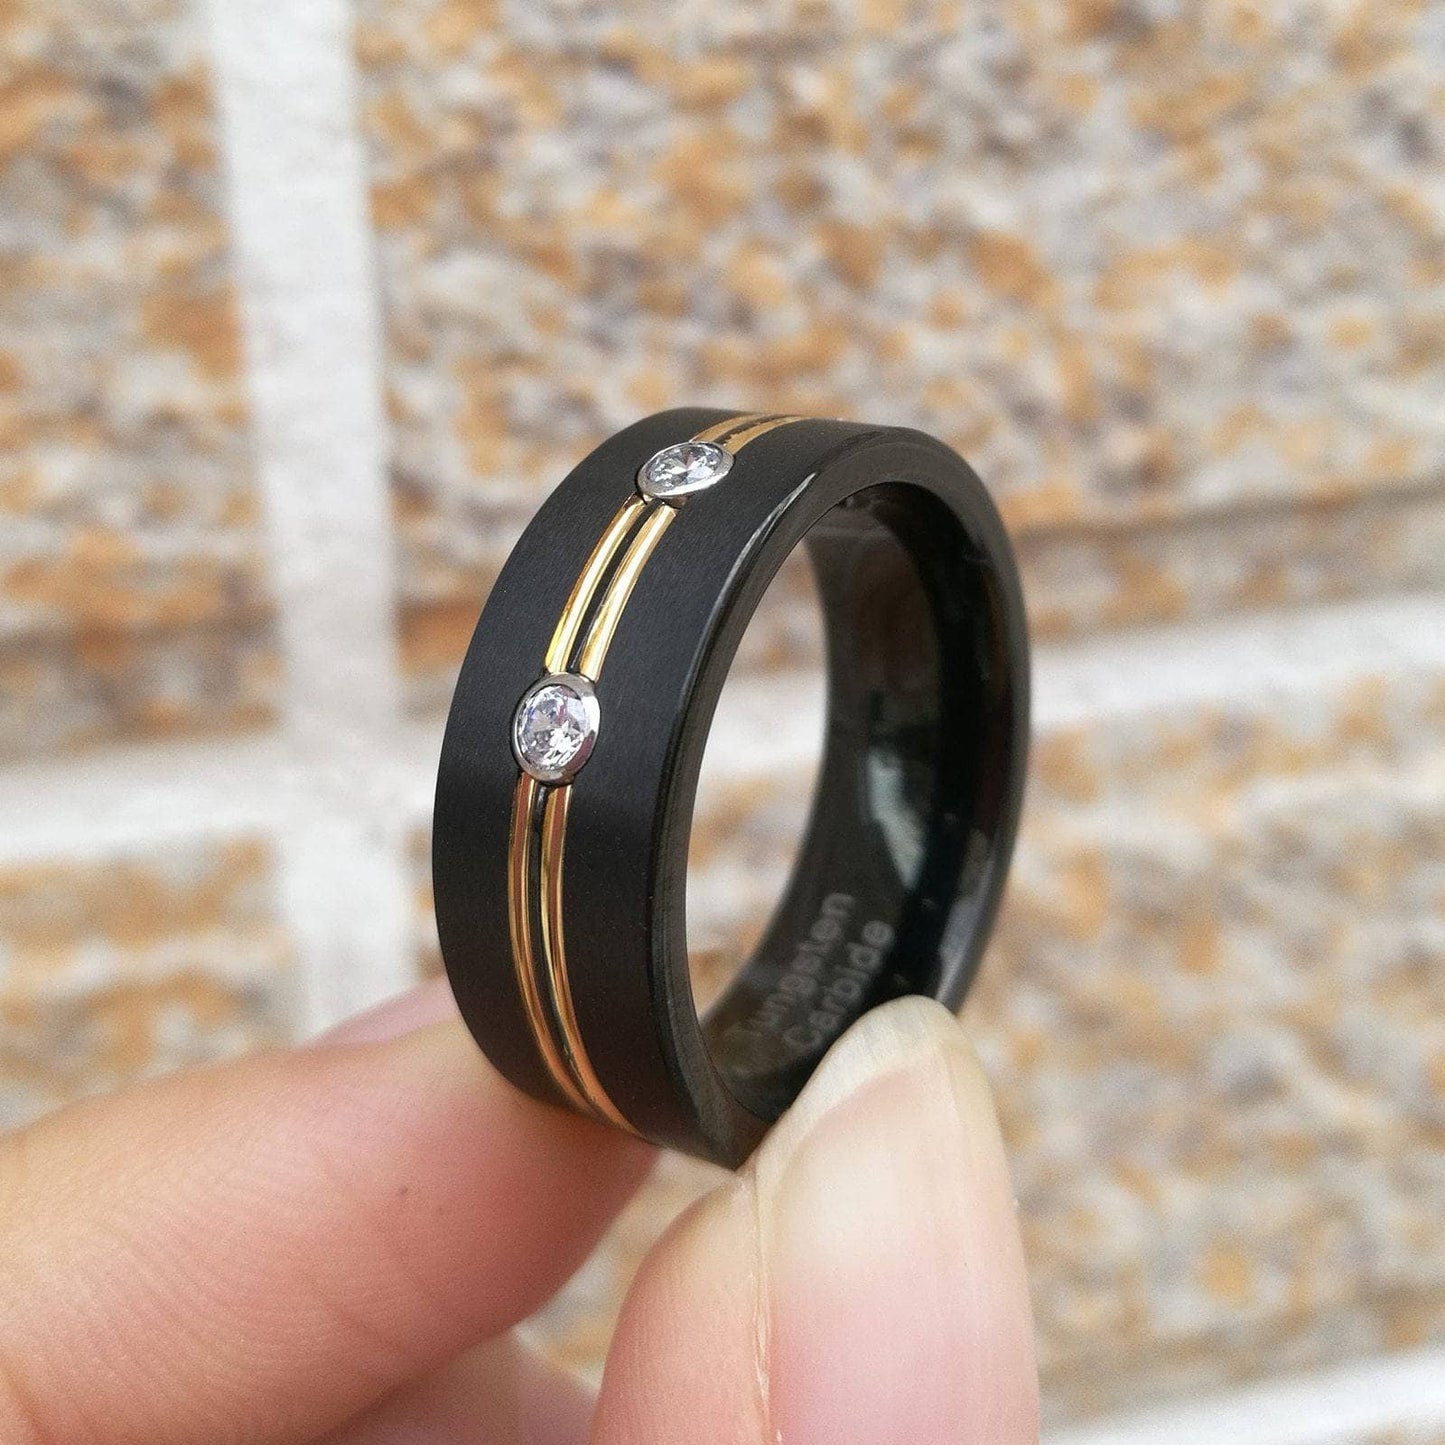 Tungsten Carbide EVN Stone Double Gold Lines Ring Band-Black Diamonds New York